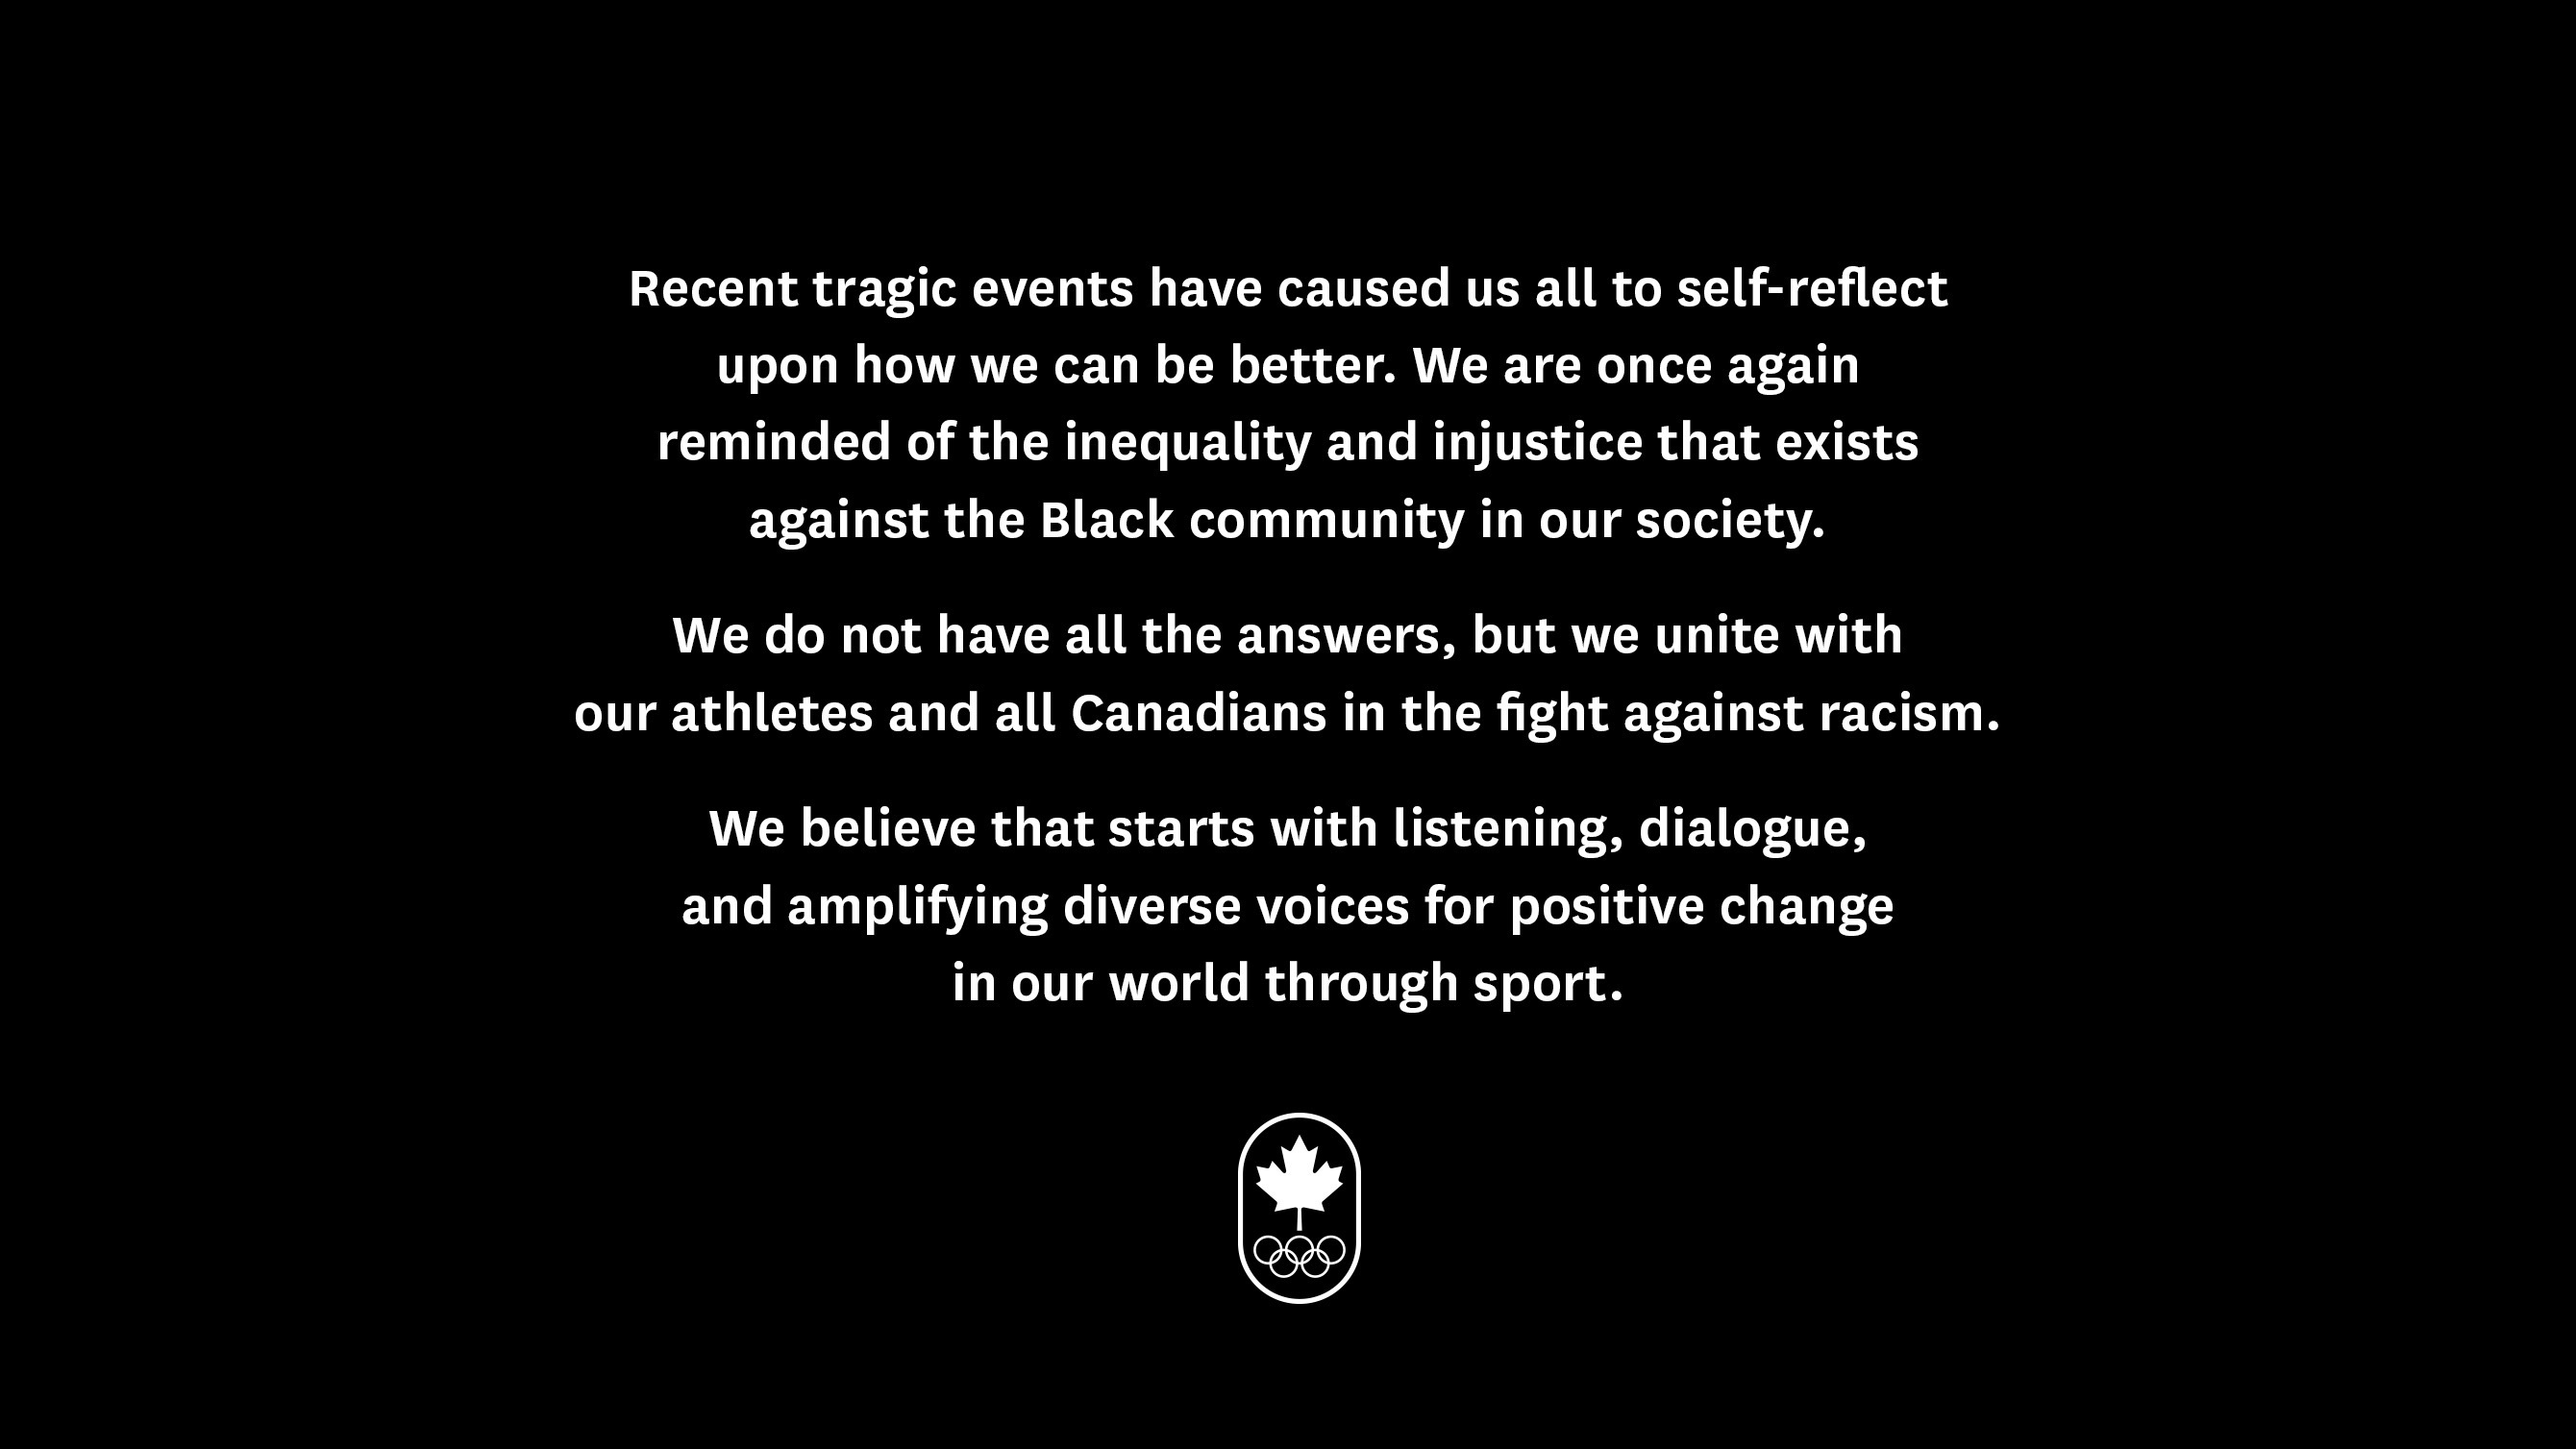 Recent tragic events have caused us all to self-reflect upon how we can be better. We are once again reminded of the inequality and injustice that exists against the Black community in our society. We do not have all the answers, but we unite with our athletes and all Canadians in the fight against racism. We believe that starts with listening, dialogue, and amplifying diverse voices for positive change in our world through sport.